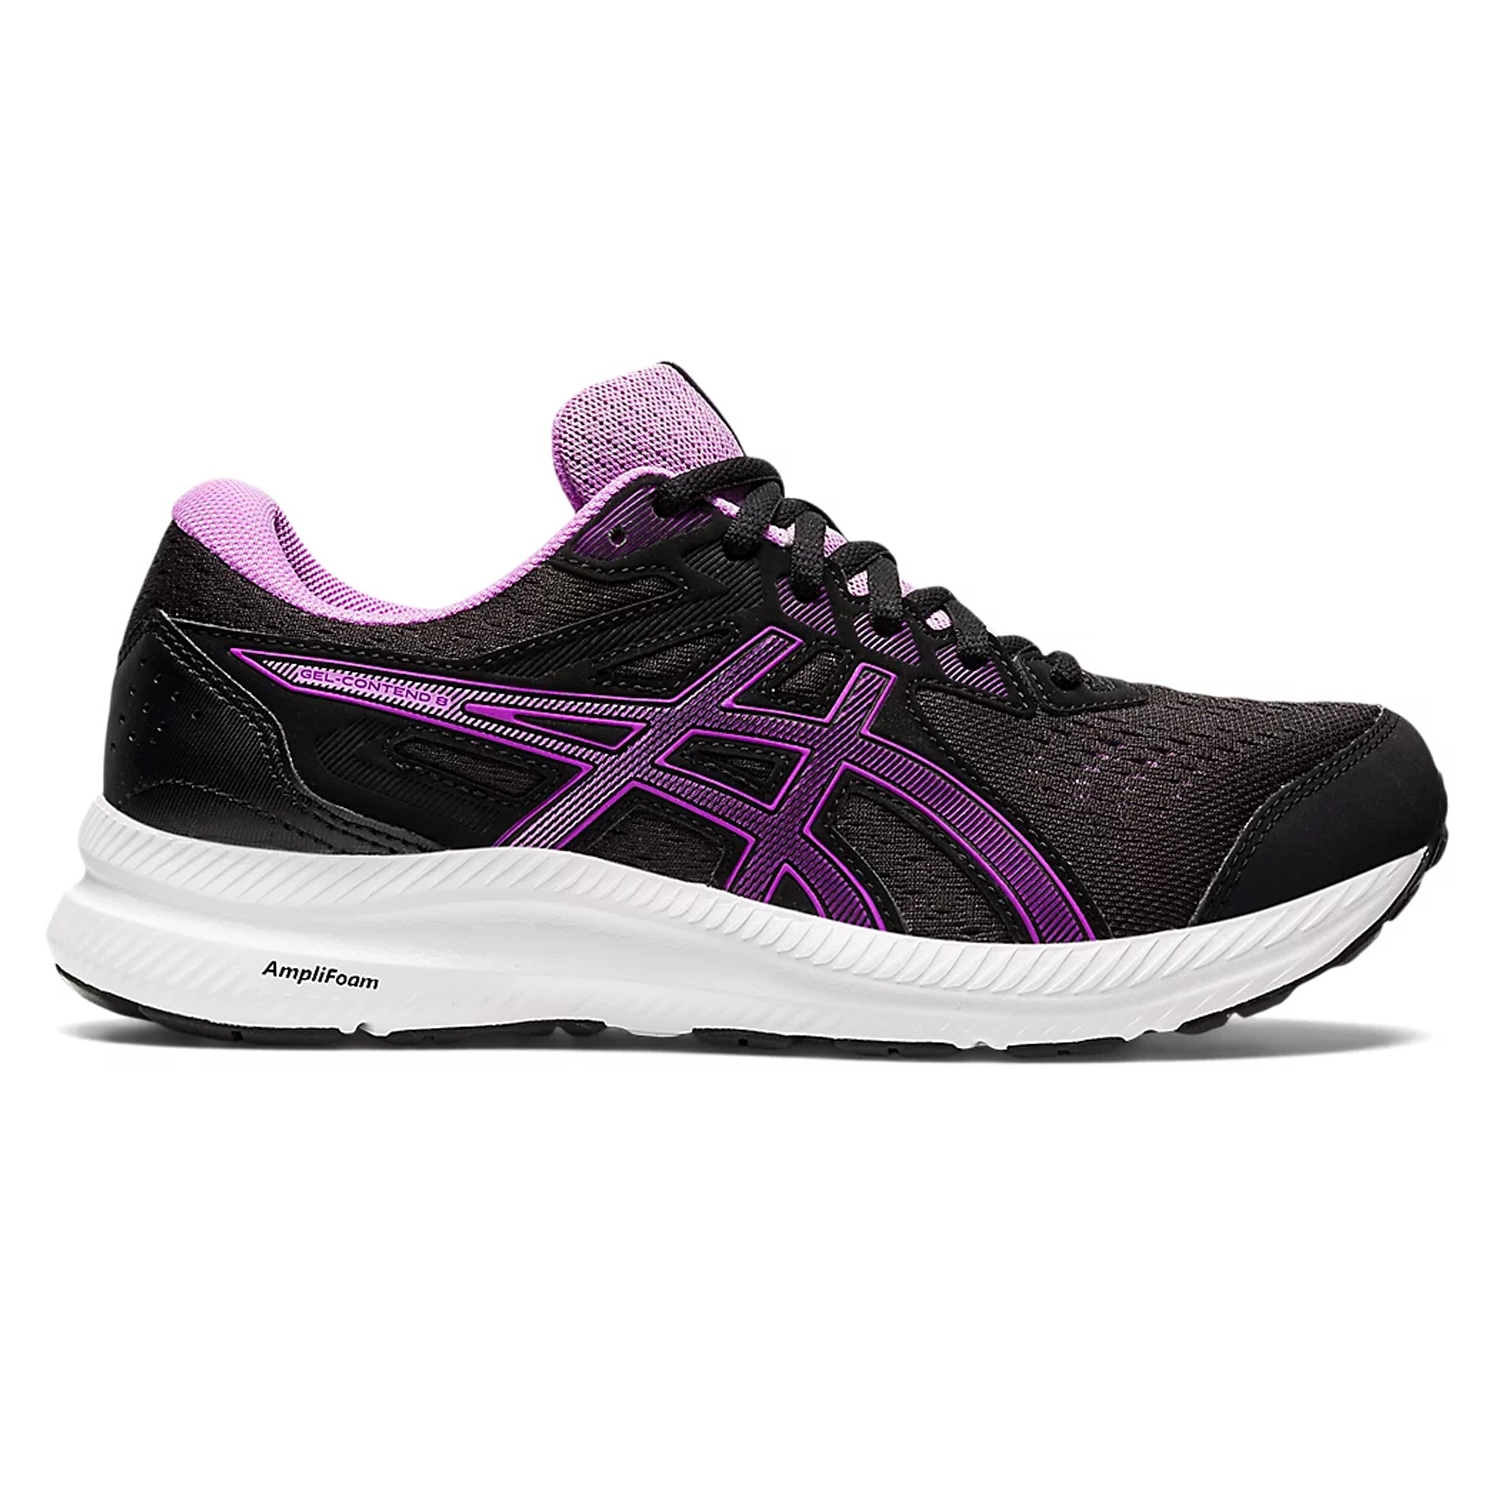 Asics Gel-Contend 8 Womens Running Shoes: Black/Orchid | Mike Pawley Sports